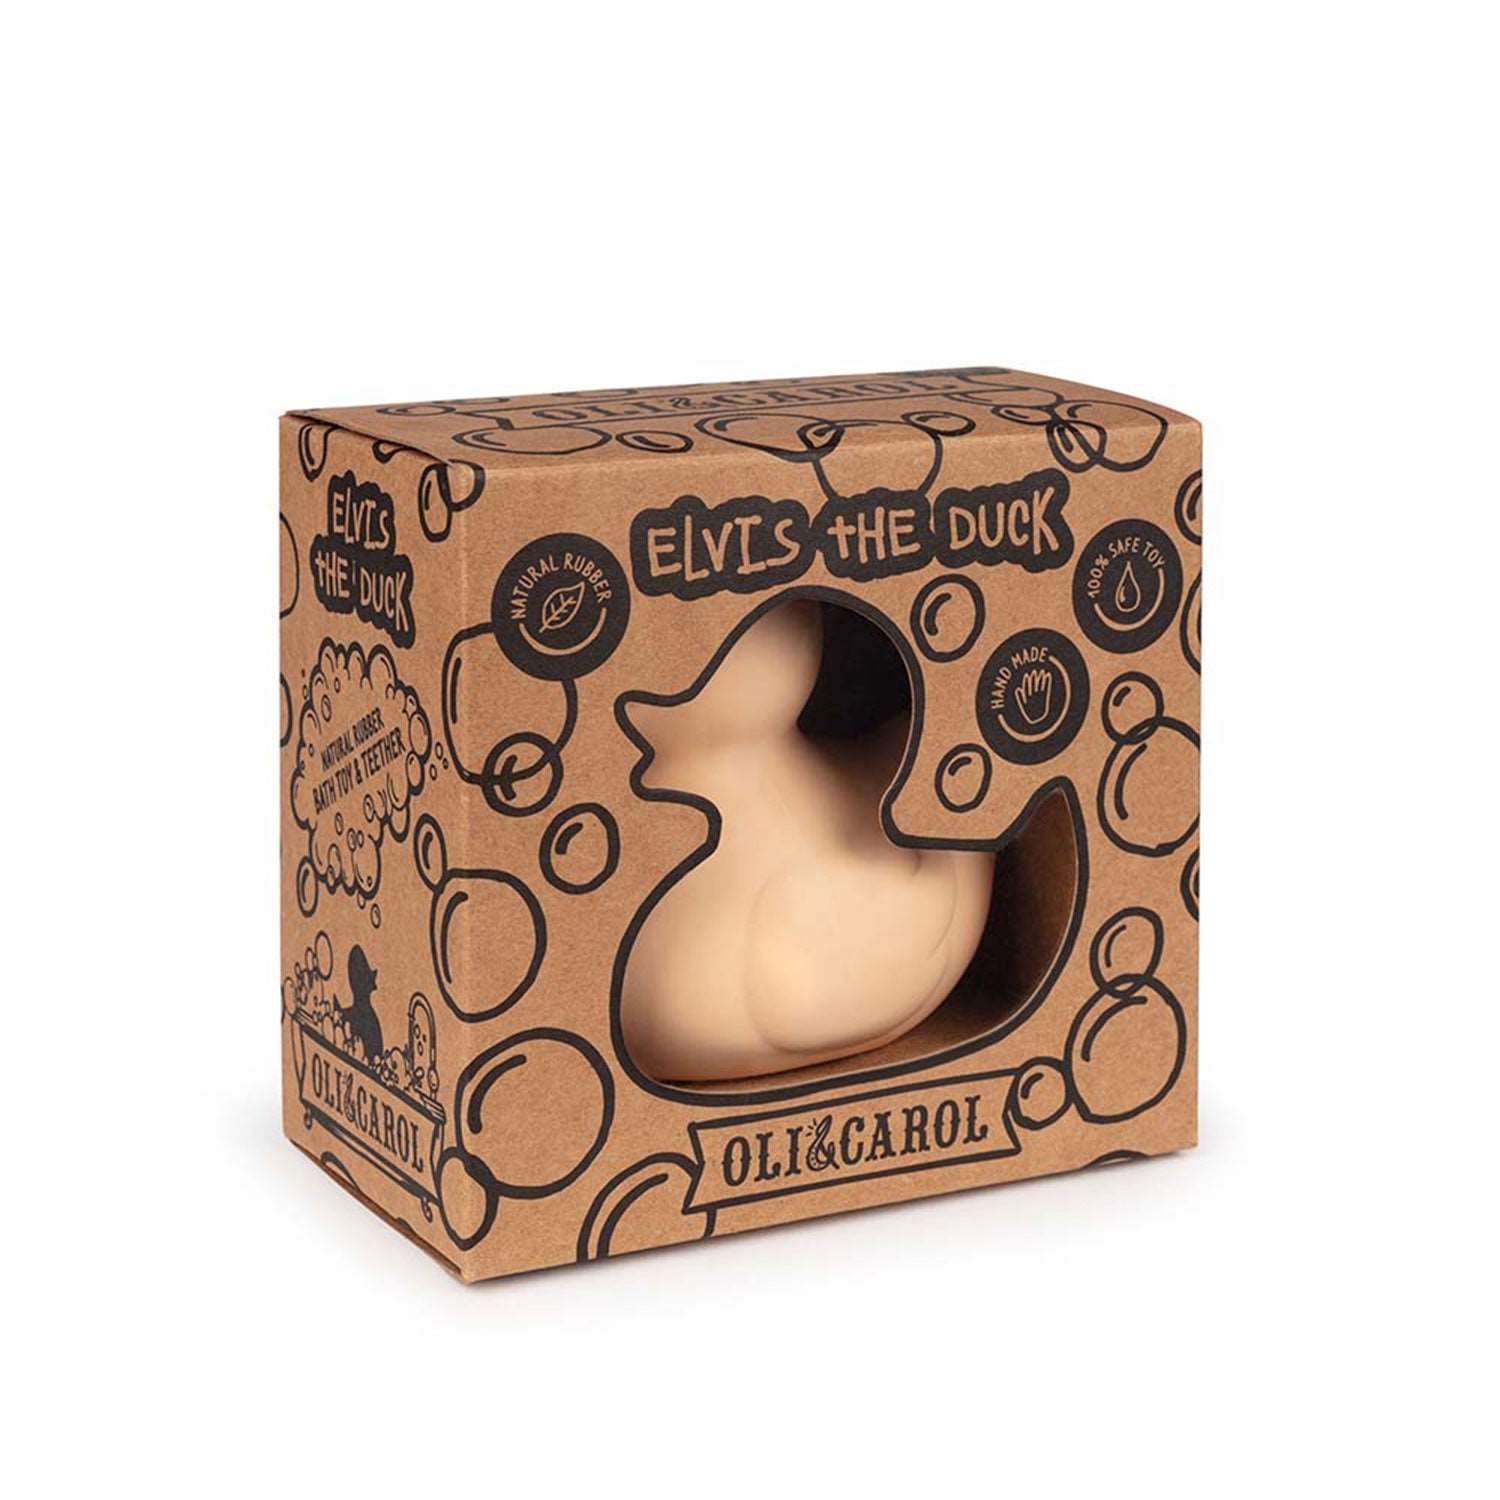 Elvis the Duck Nude Bath Toy